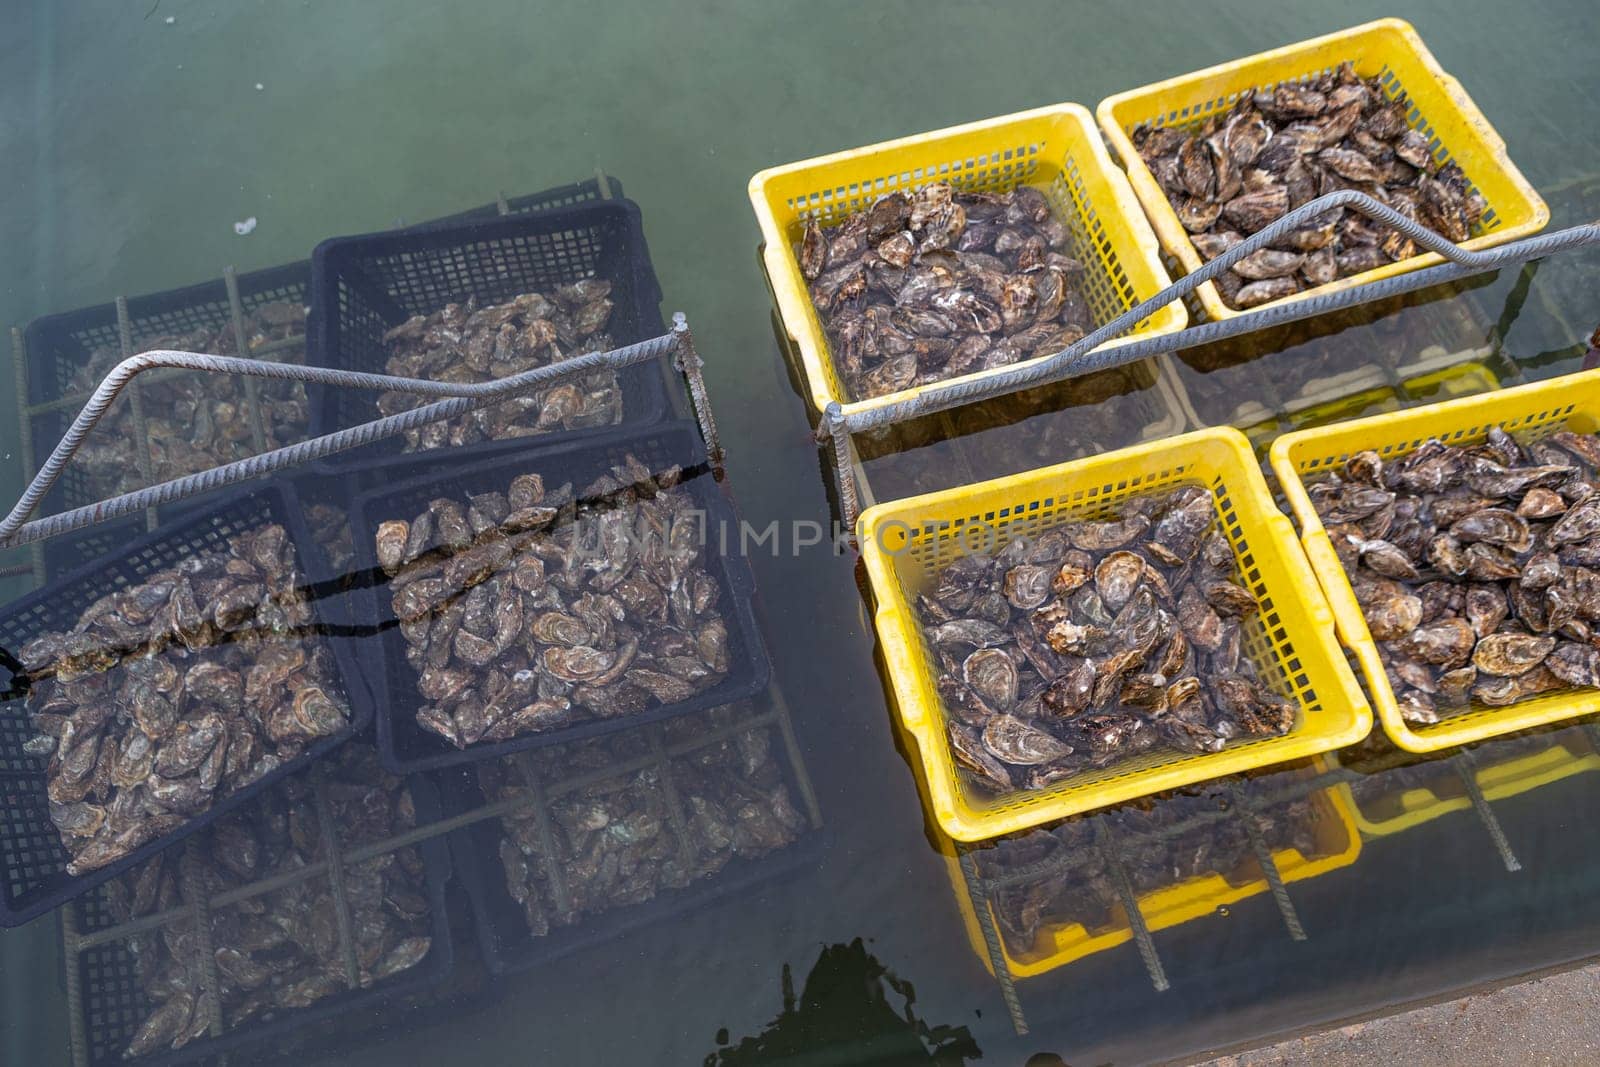 Oysters in containers with water at oyster farm Saint-Vaast-la-Hougue, French commune, Manche department, Normandy region,